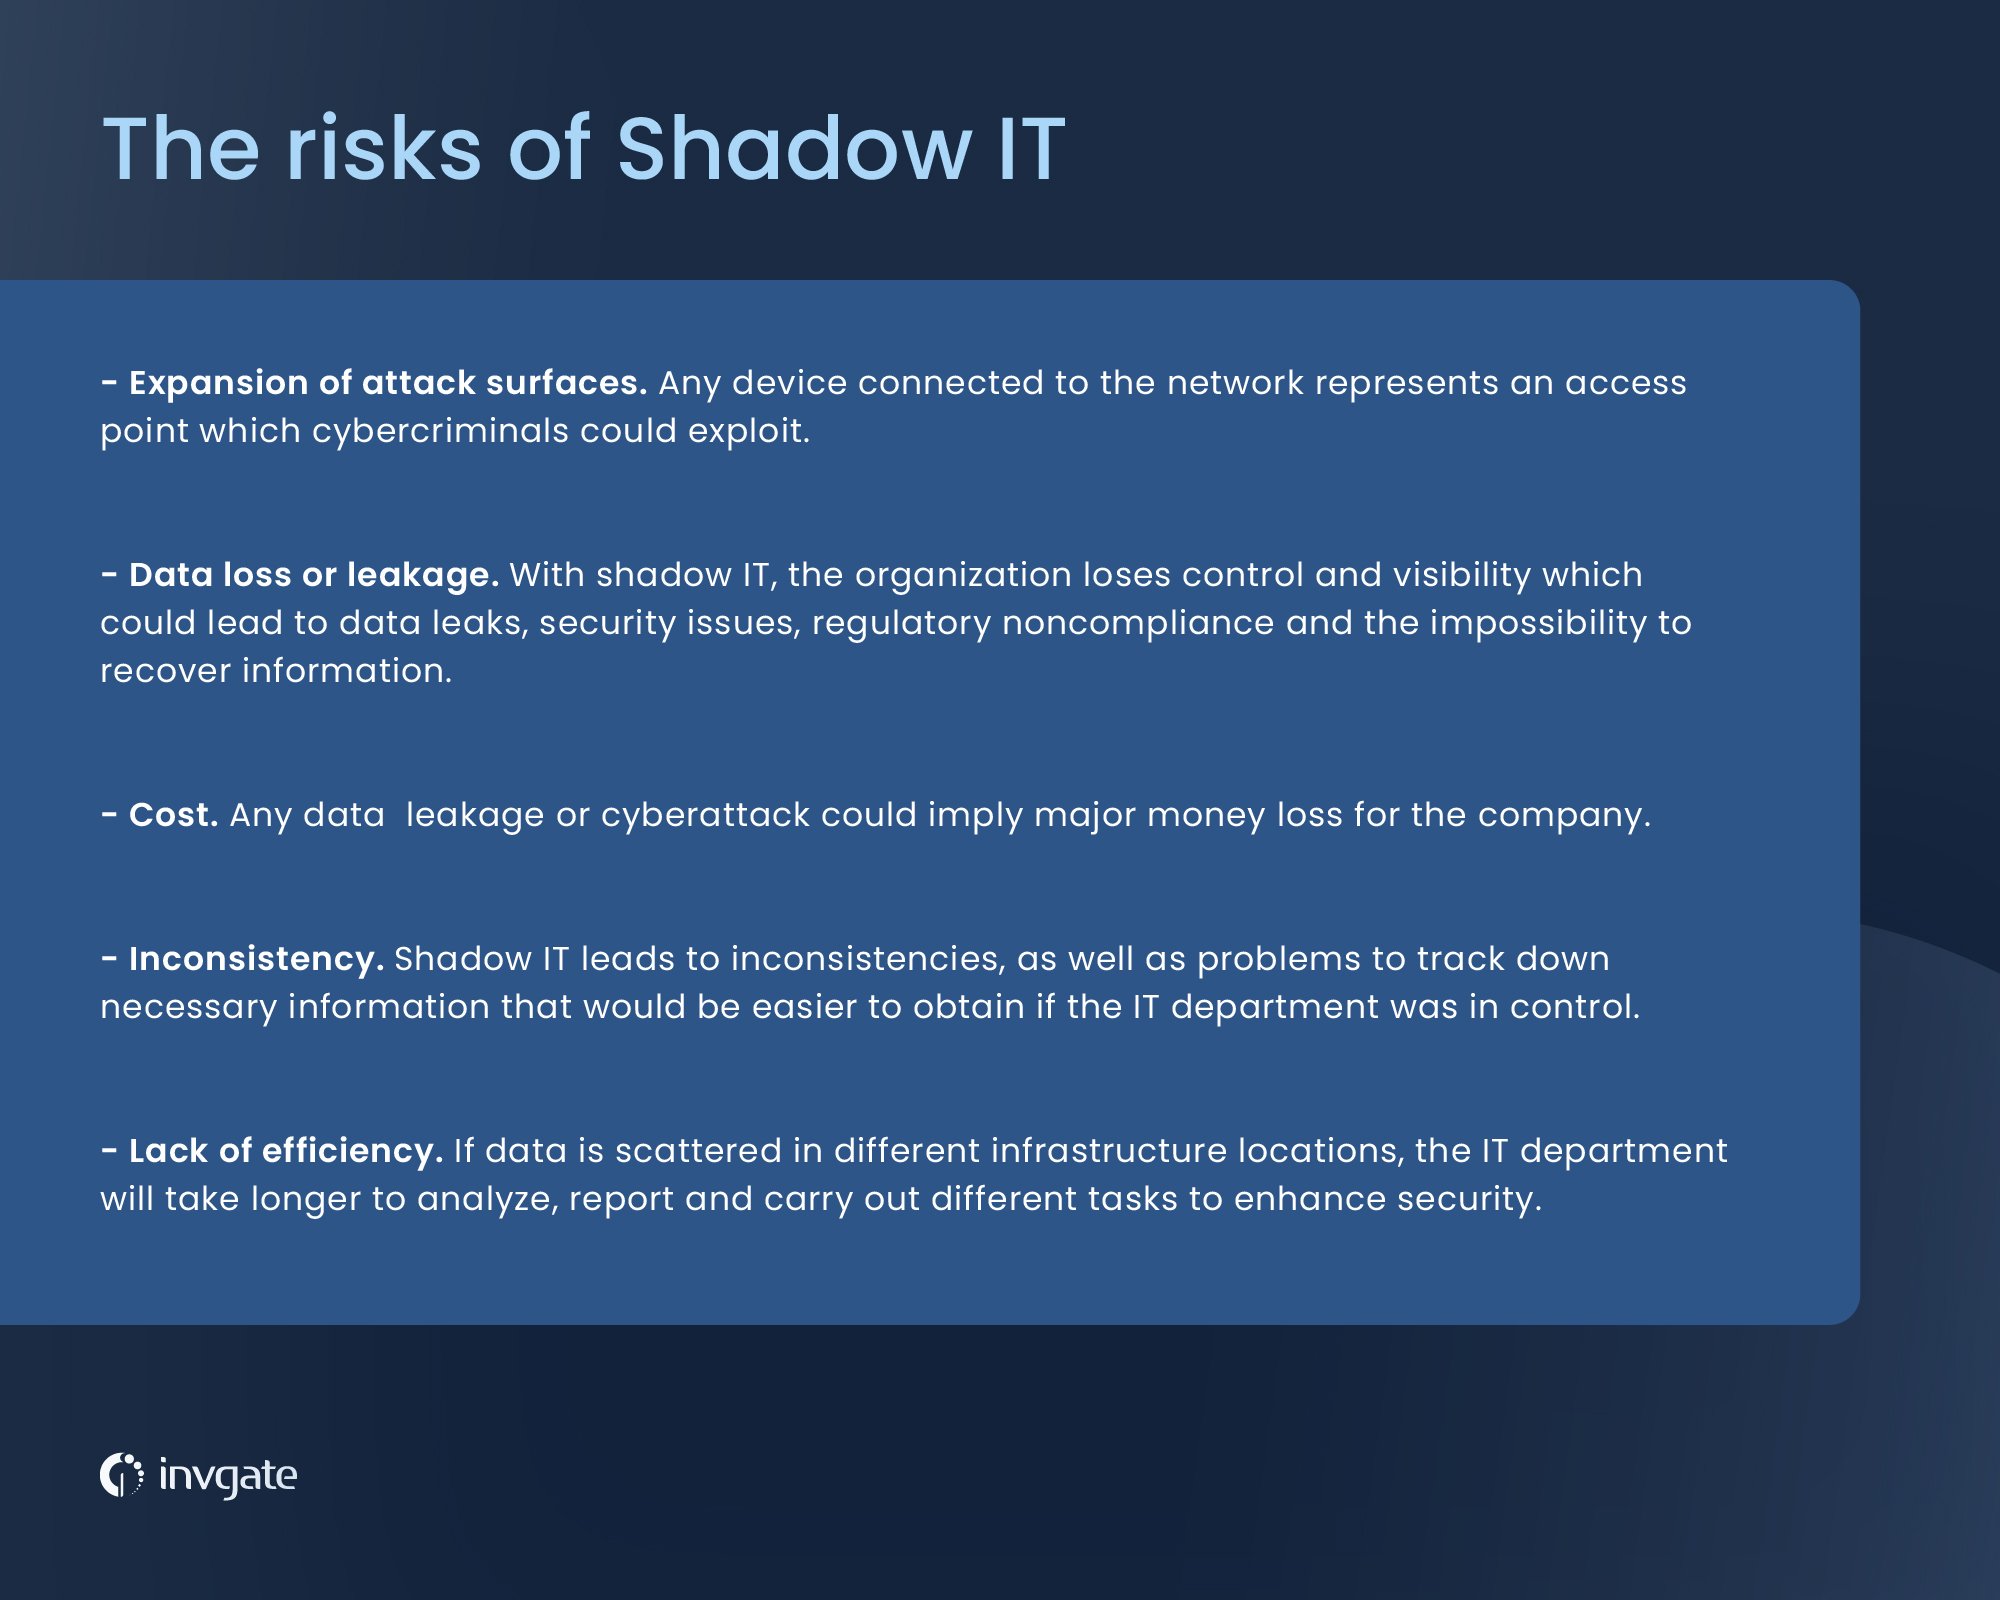 While shadow IT can give the idea that helps employees improve productivity, it introduces serious security risks. Here are the most critical ones.